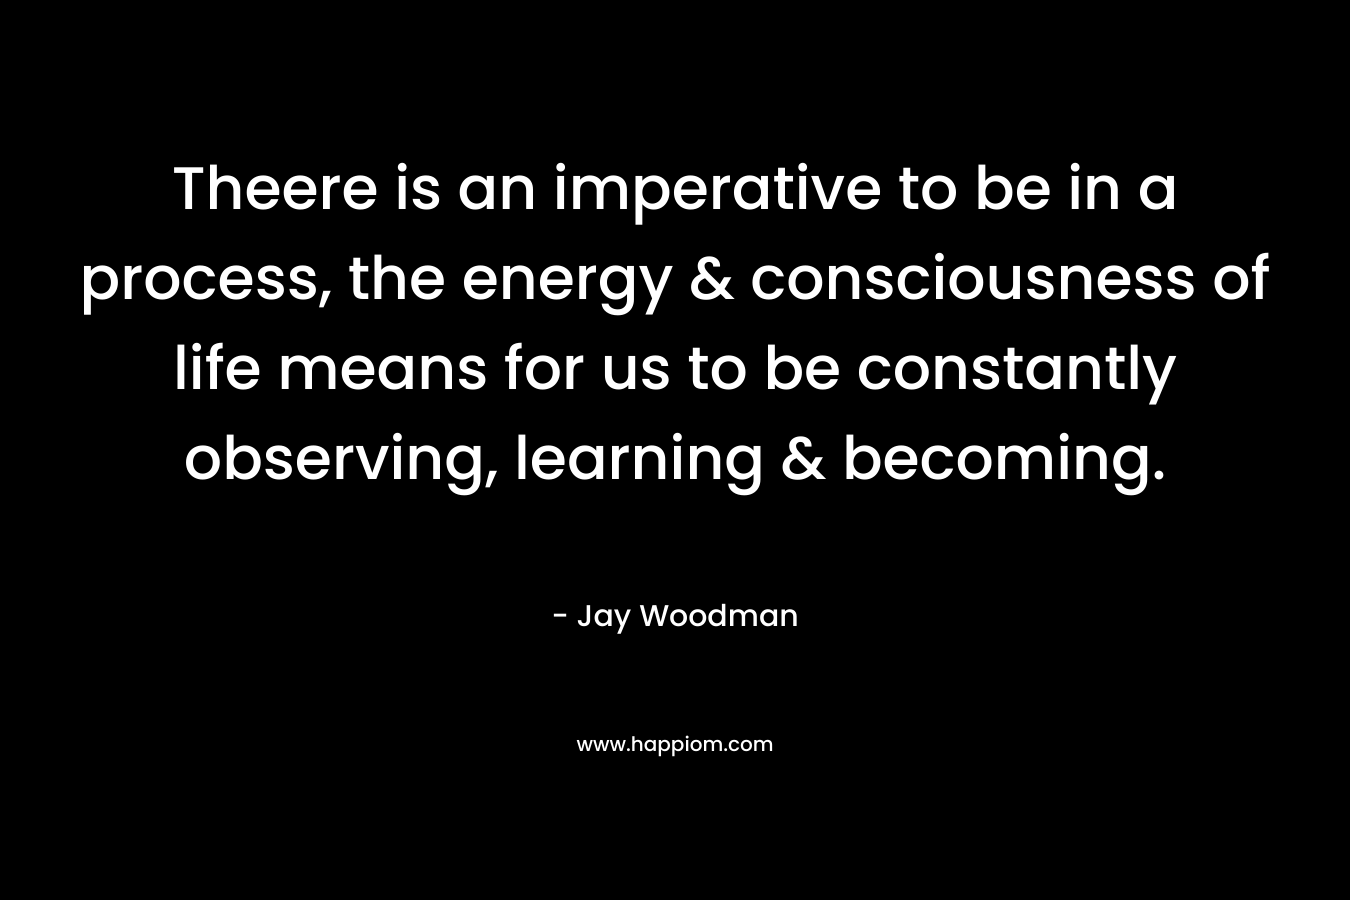 Theere is an imperative to be in a process, the energy & consciousness of life means for us to be constantly observing, learning & becoming. – Jay Woodman